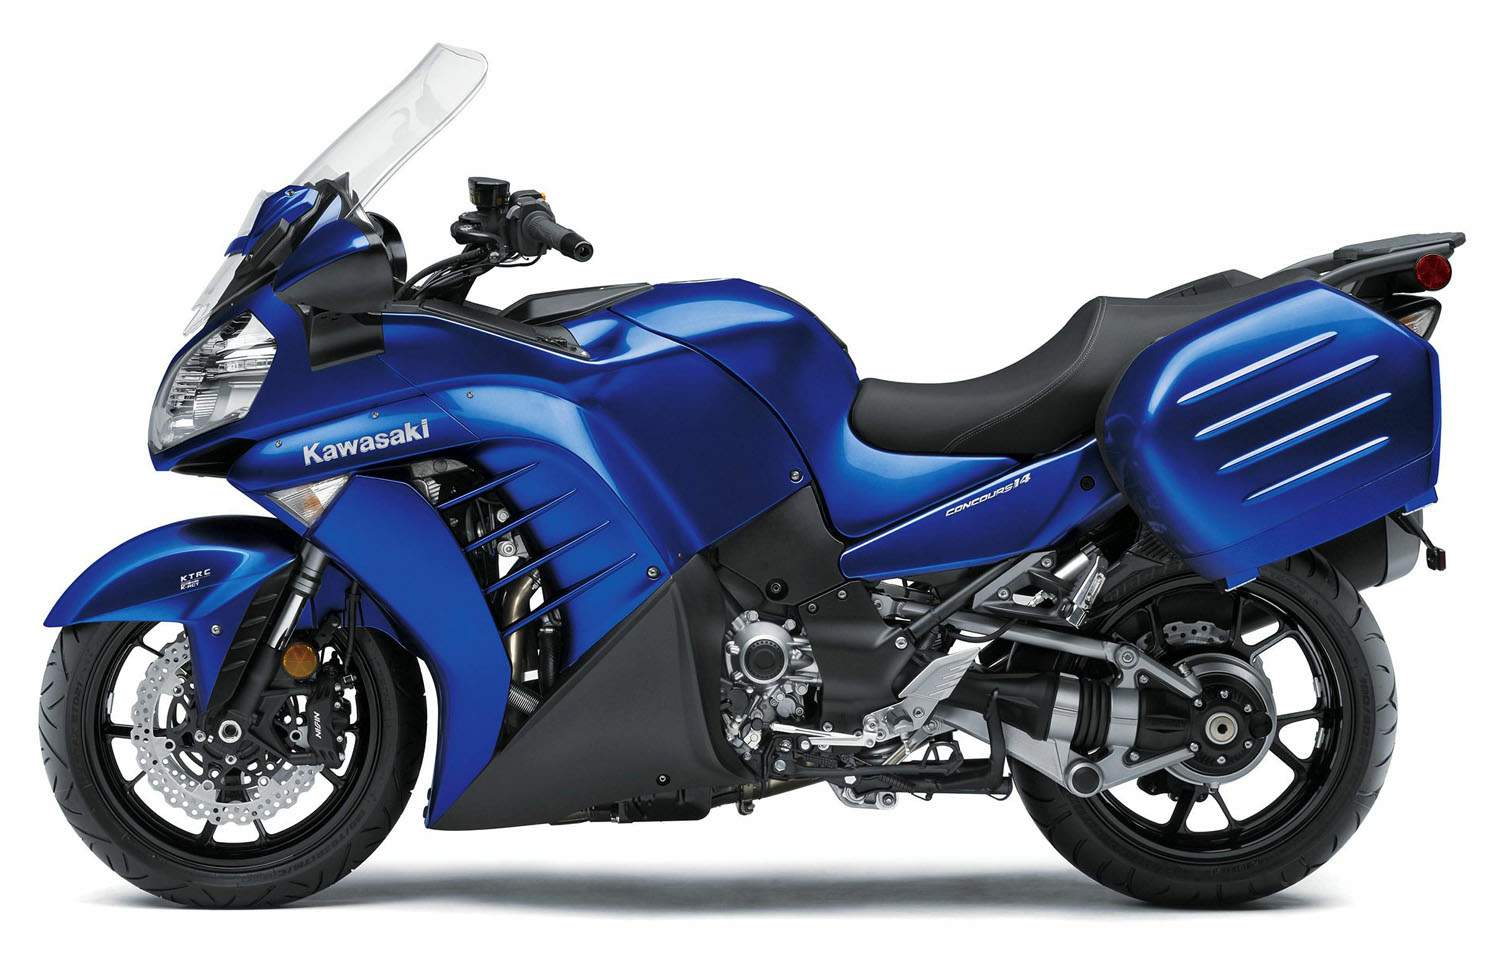 Kawasaki GTR 1400 Concours 14 technical specifications